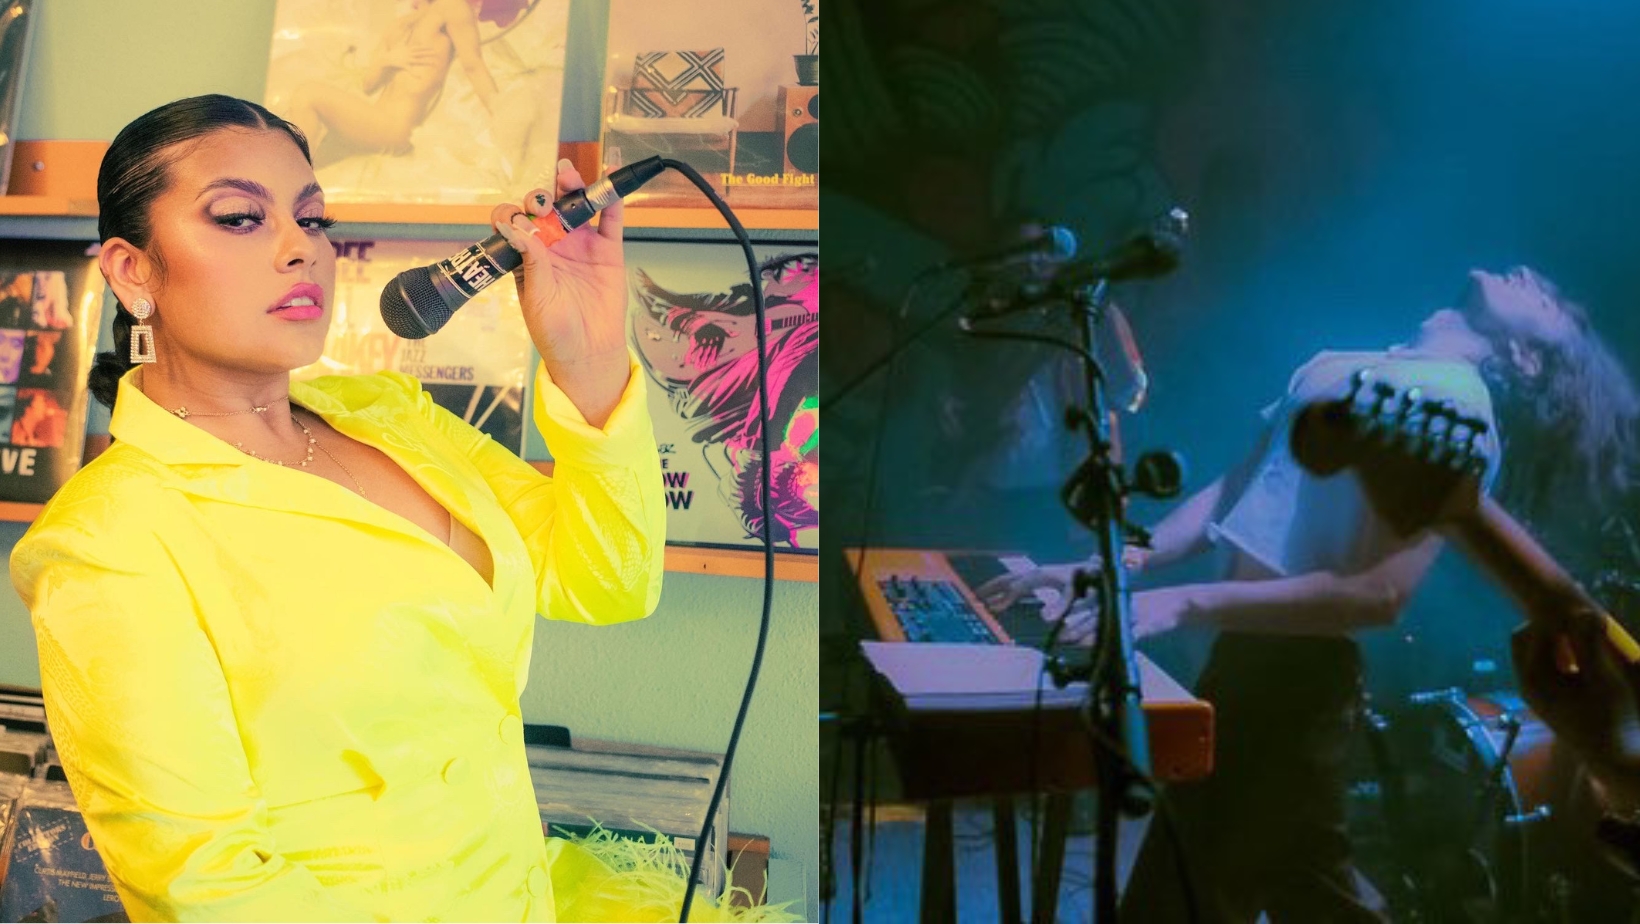 Muriel, wearing yellow, holds a microphone and Sam Cormier plays a piano, head thrown back